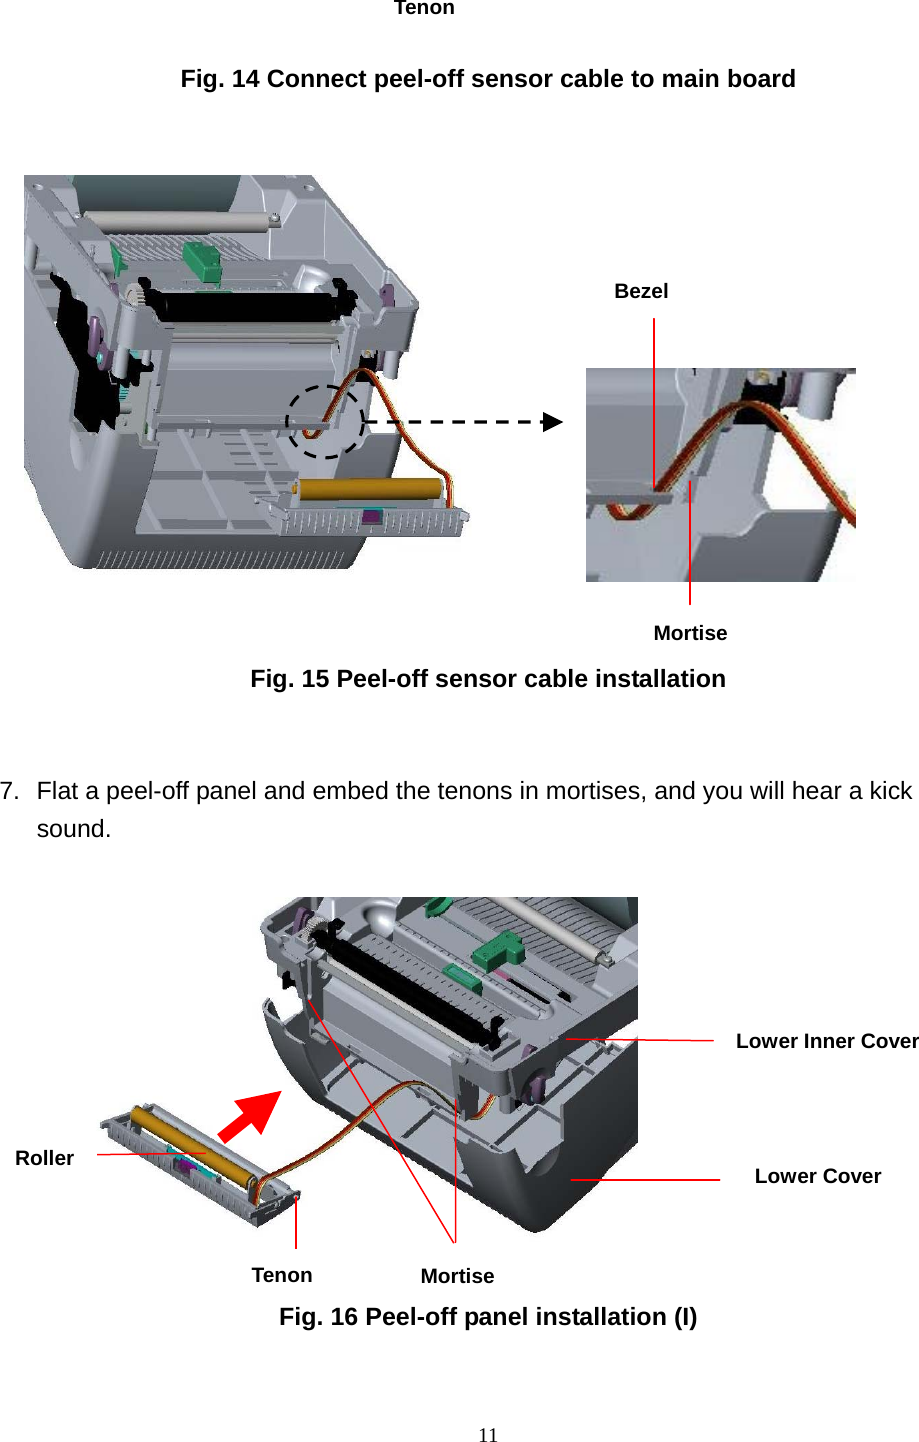  11   Fig. 14 Connect peel-off sensor cable to main board                   Fig. 15 Peel-off sensor cable installation  7.  Flat a peel-off panel and embed the tenons in mortises, and you will hear a kick sound.                   Fig. 16 Peel-off panel installation (I)  Roller Tenon  MortiseLower Inner Cover Lower CoverTenonBezelMortise